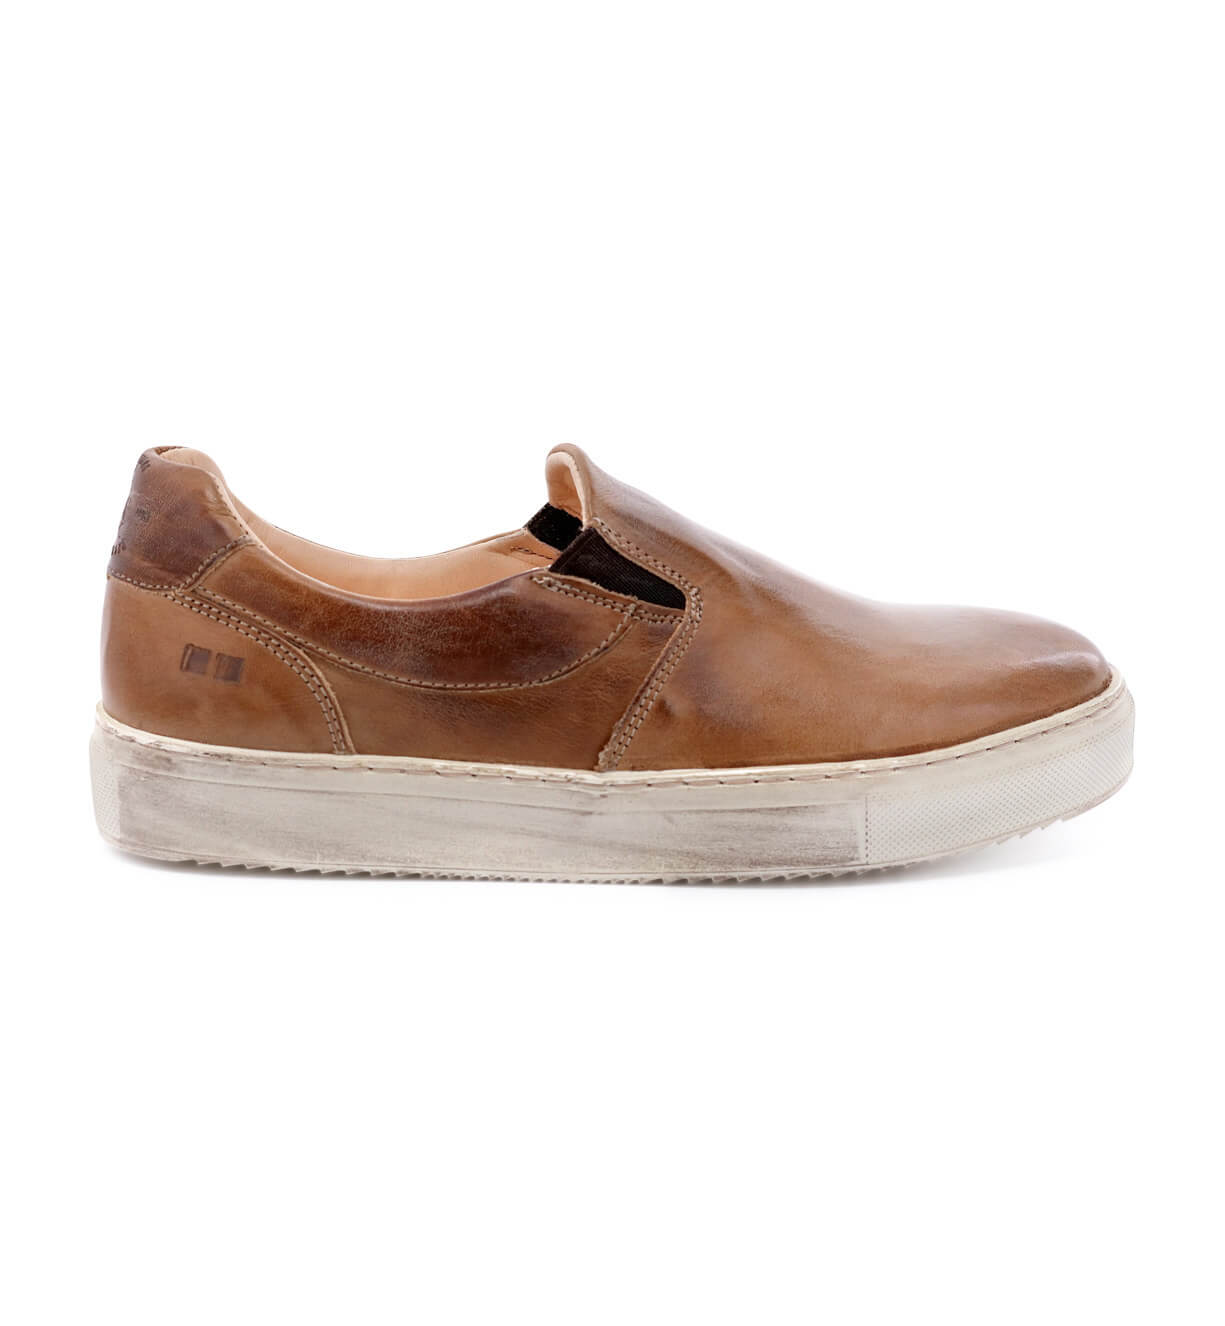 A women's slip on shoe in tan leather called Hermione by Bed Stu.